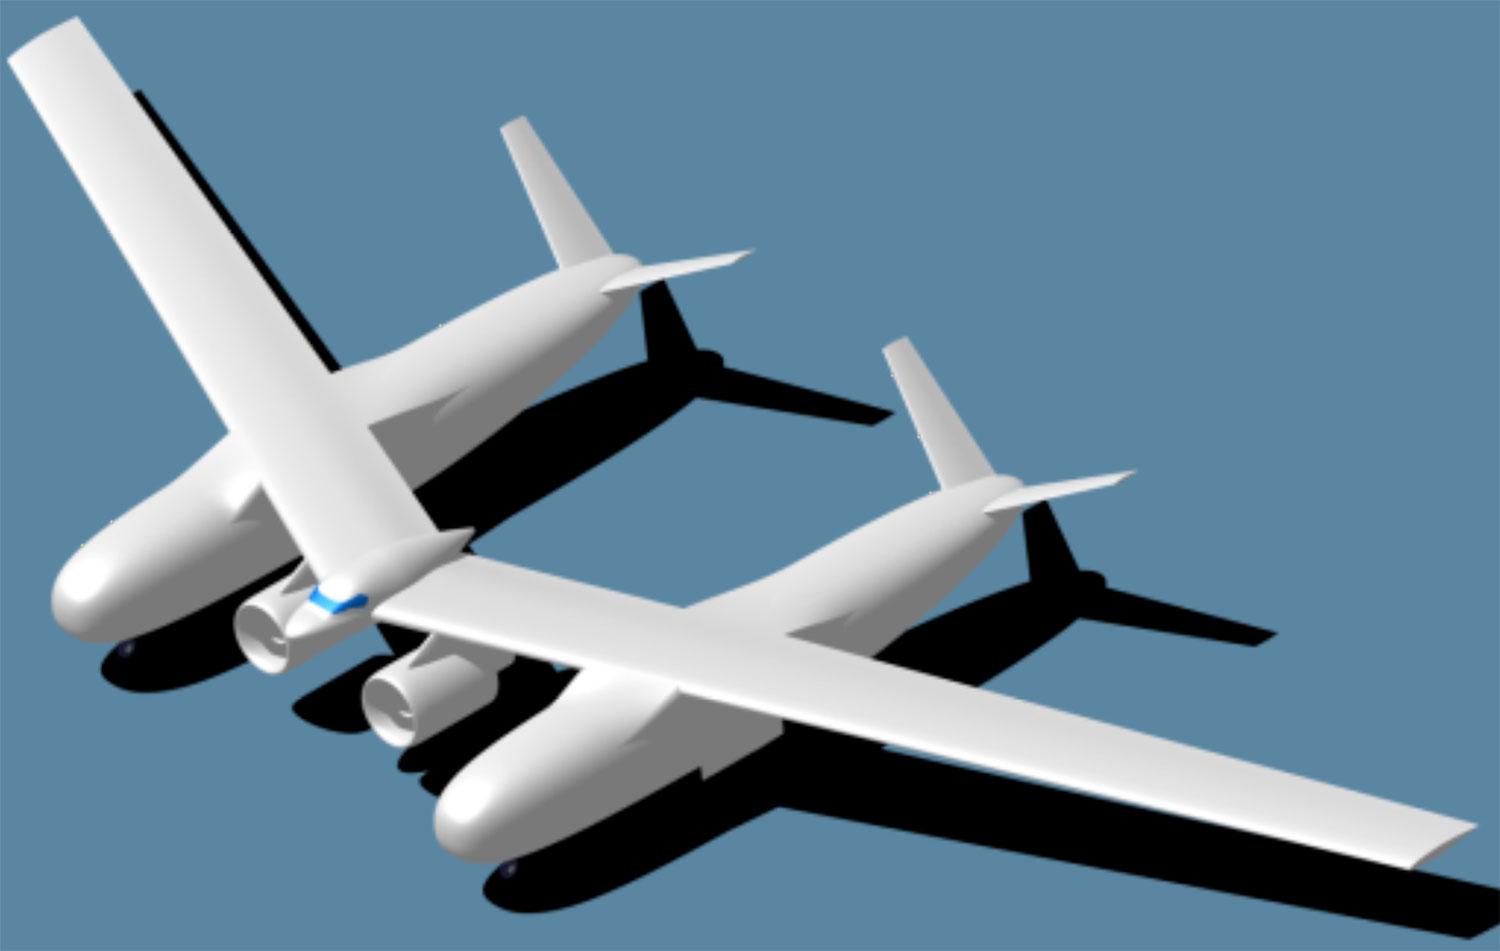 Artist concept of an aircraft that could enter service in 2025 from the team led by Northrop Grumman.